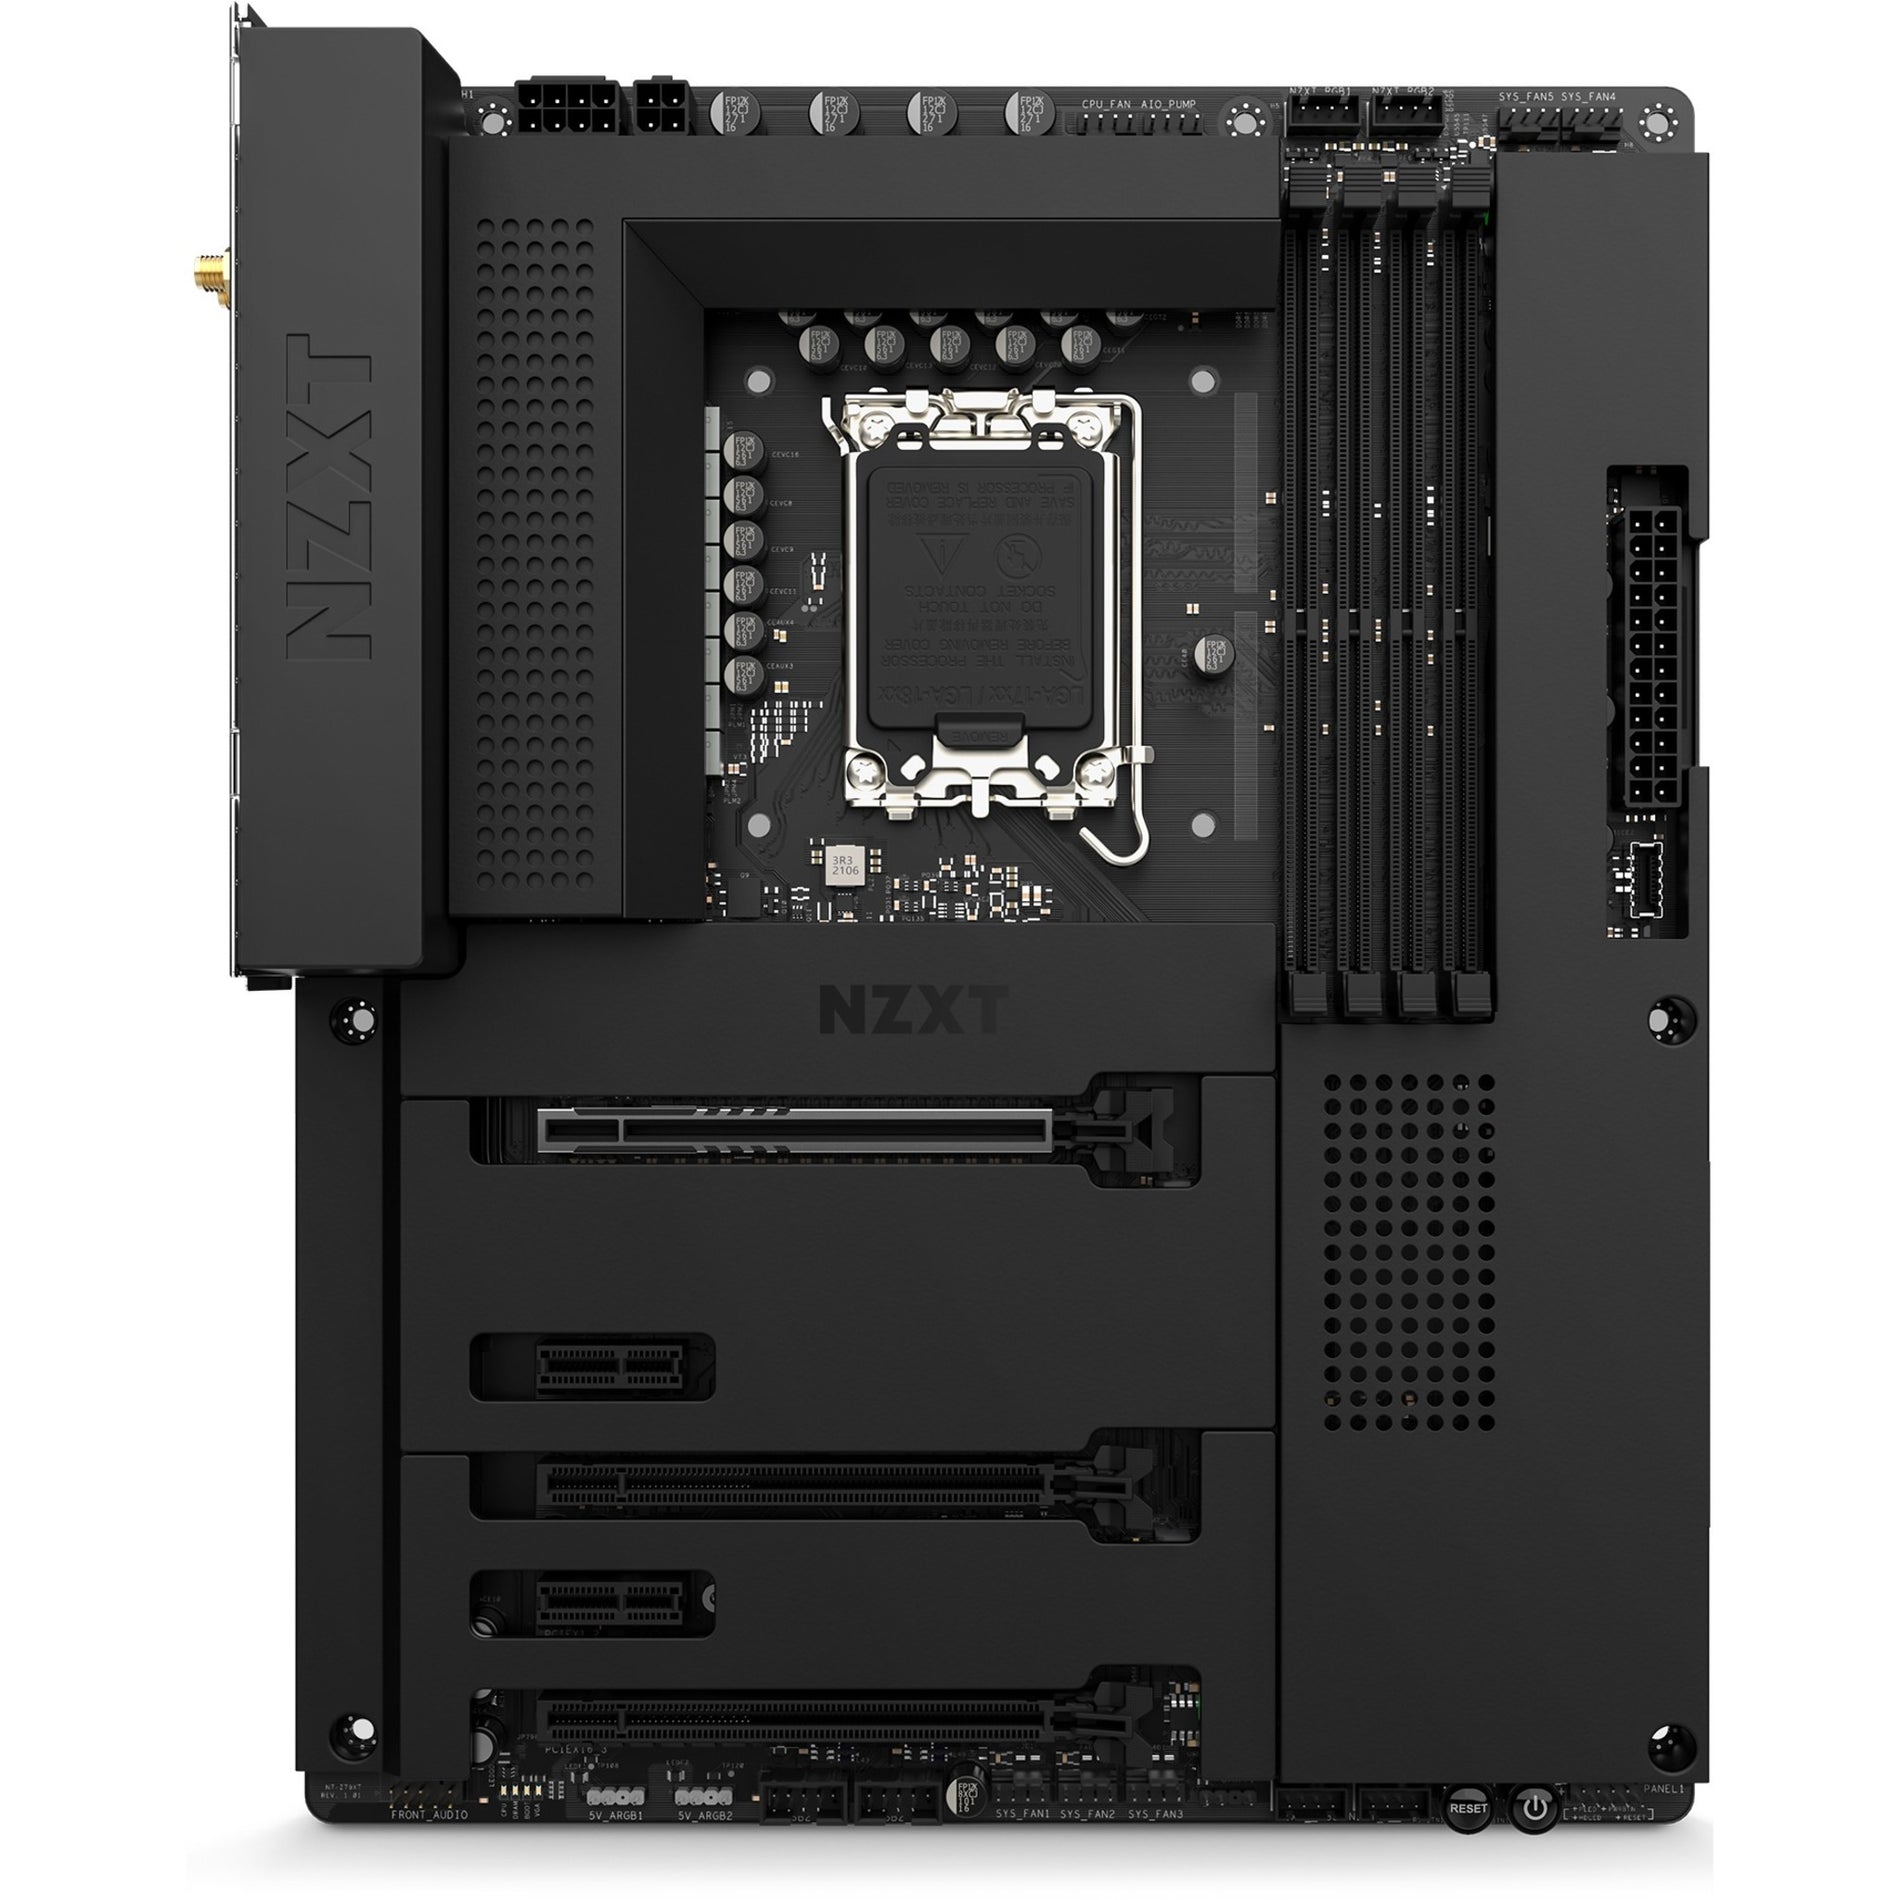 NZXT N7-Z79XT-B1 Desktop Motherboard, Intel Z790 Chipset with Wi-Fi and Black Cover